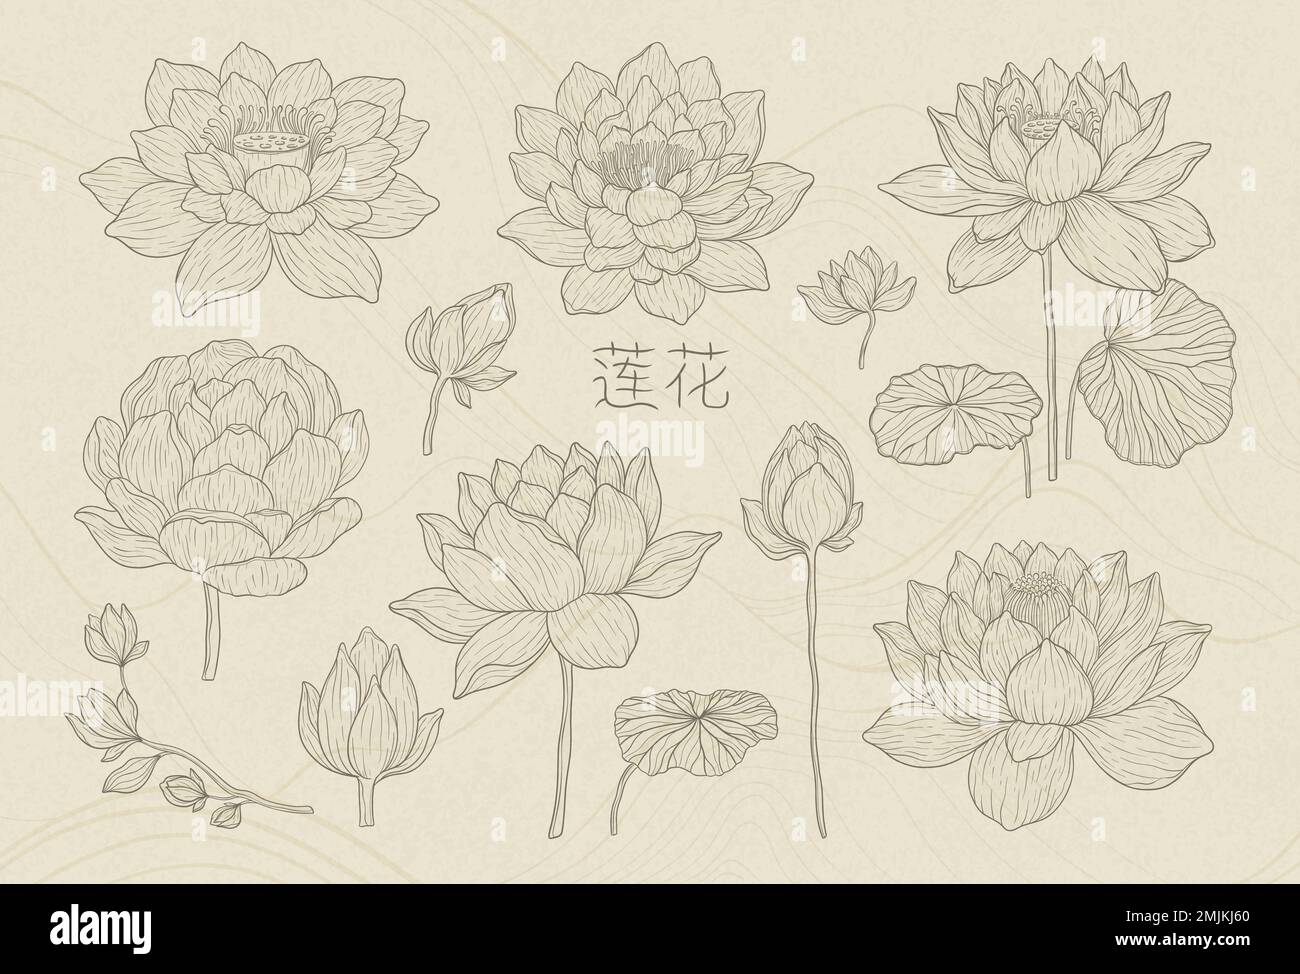 Set of lotus flowers with leaves. Nelumbo flower drawn with a dark outline on a beige background, isolated elements. Realistic water lilies based on Stock Vector